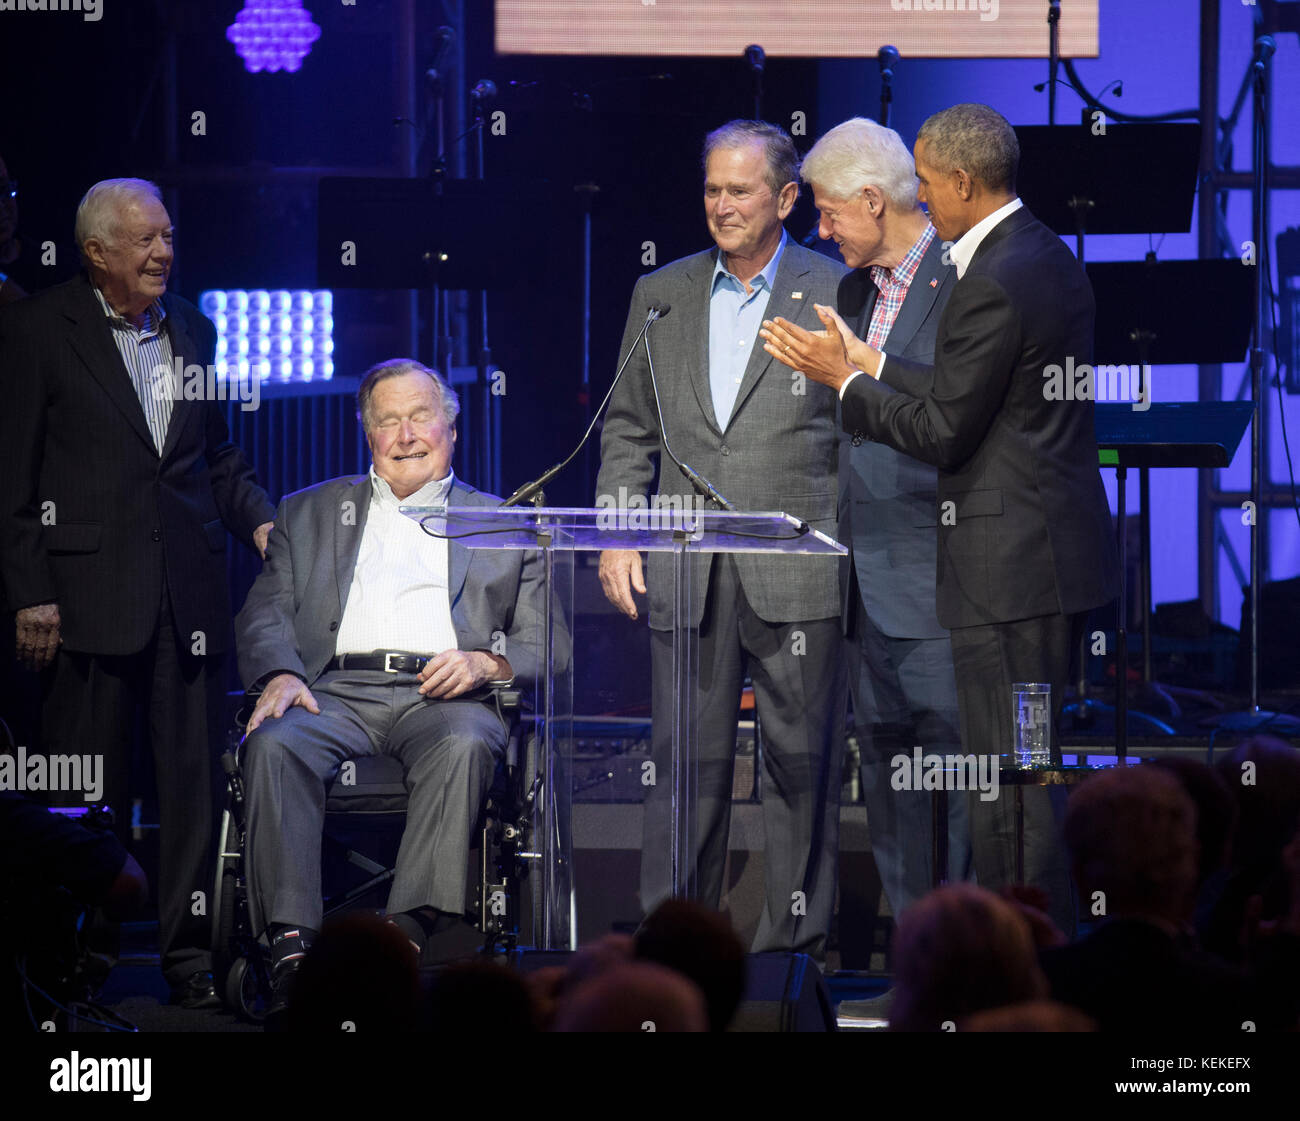 College Station, Texas USA Oct. 21, 2017: The five living former U.S. Presidents onstage at Texas A&M University's Reed Arena for a One America Appeal benefit concert and fund raiser for hurricane and storm relief. Left to right, former presidents Jimmy Carter, George H.W. Bush, George W. Bush, Bill Clinton and Barack Obama appear midway in the concert. Credit: Bob Daemmrich/Alamy Live News Stock Photo